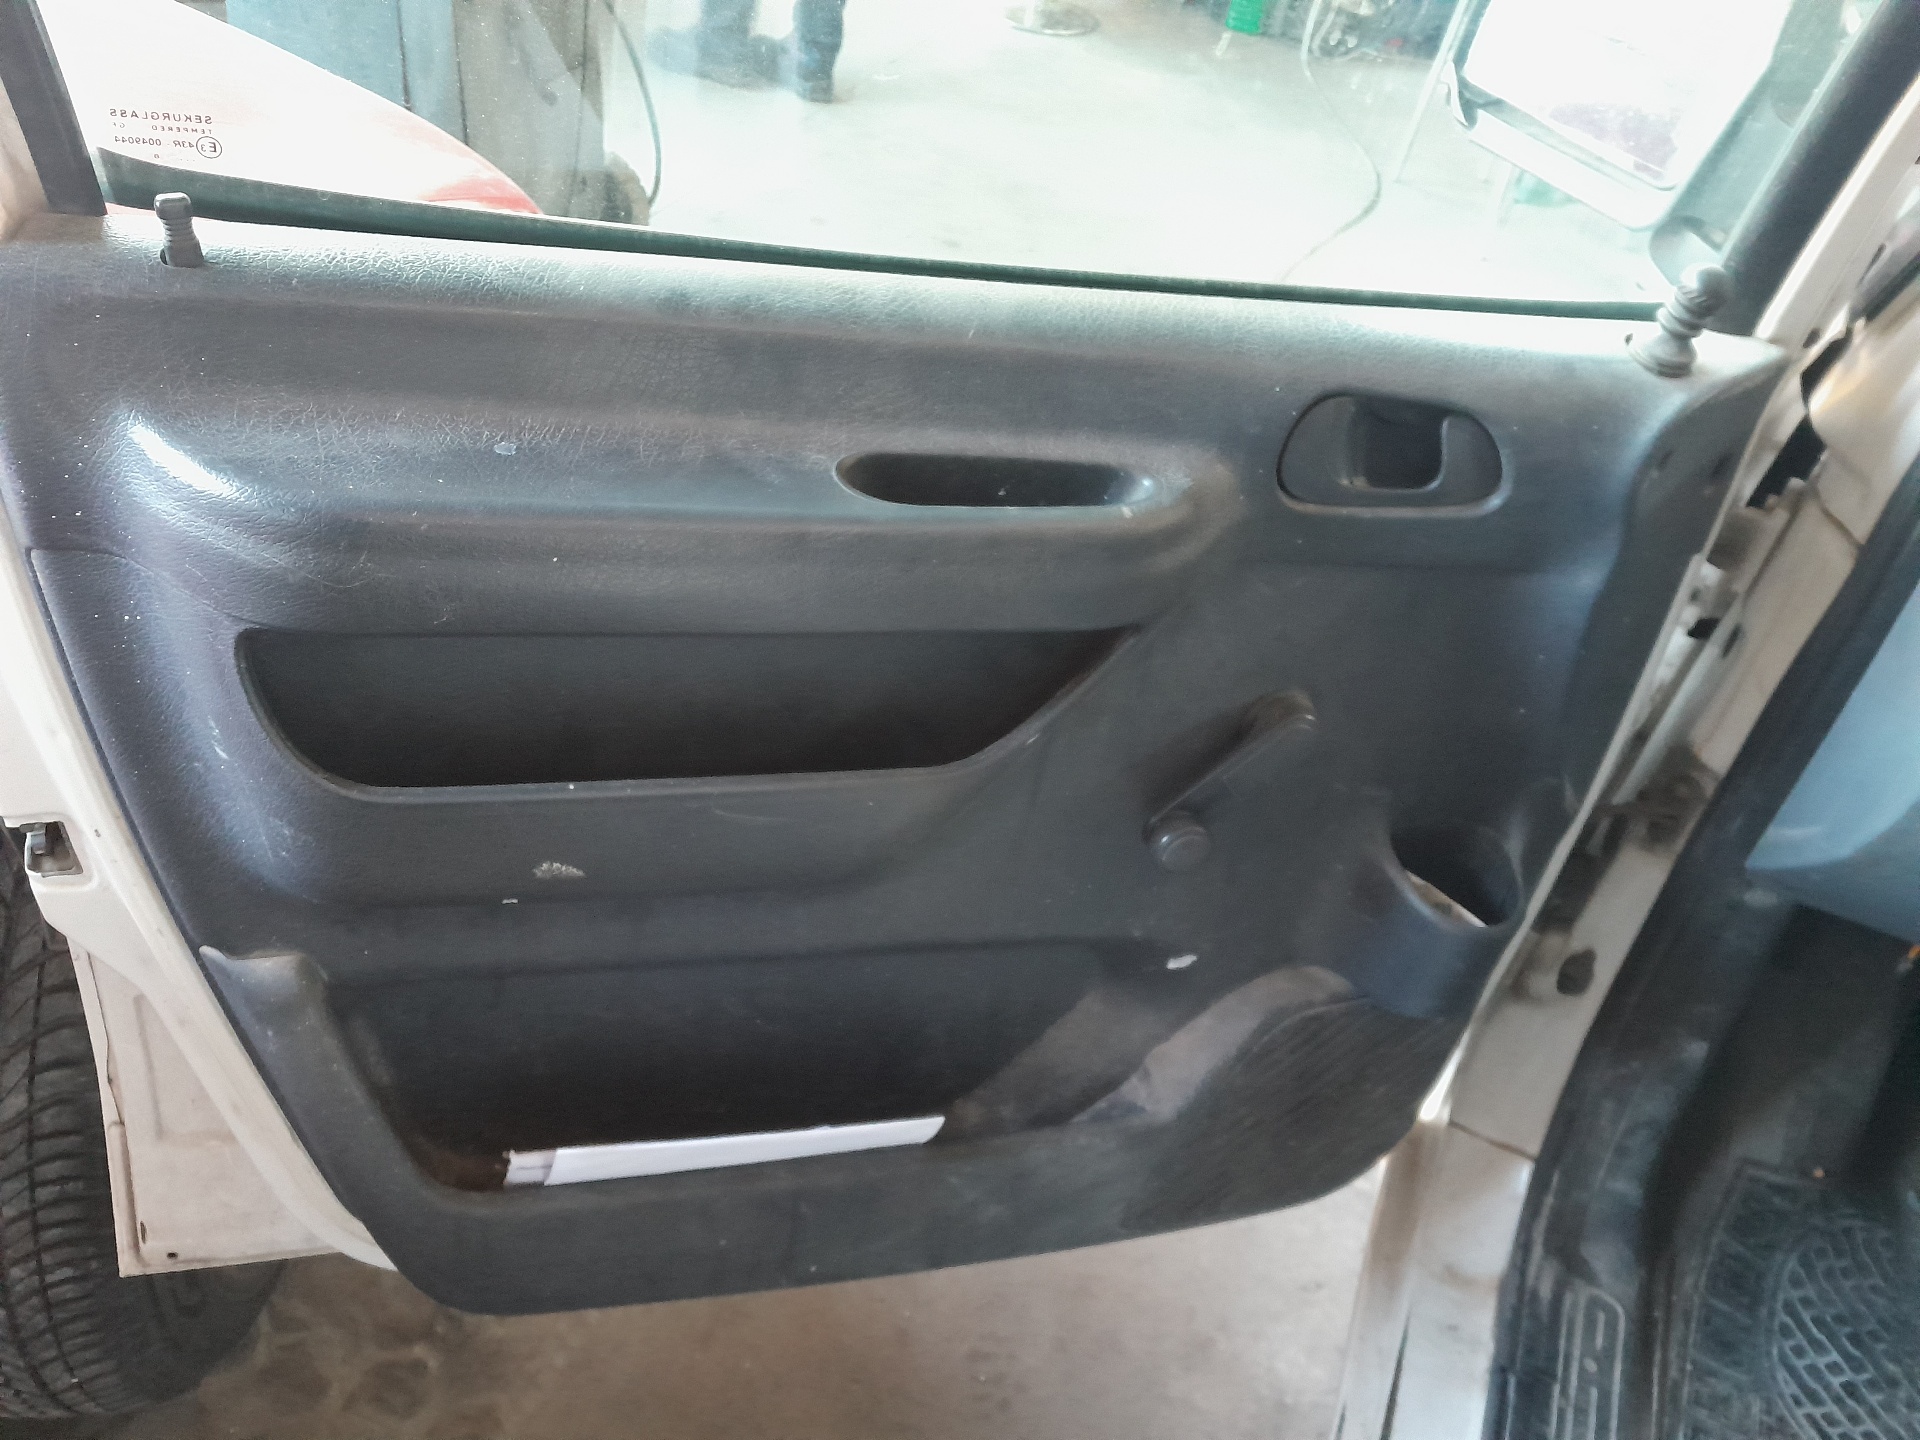 PEUGEOT Expert 1 generation (1996-2007) Other Interior Parts 1470970077 20150946